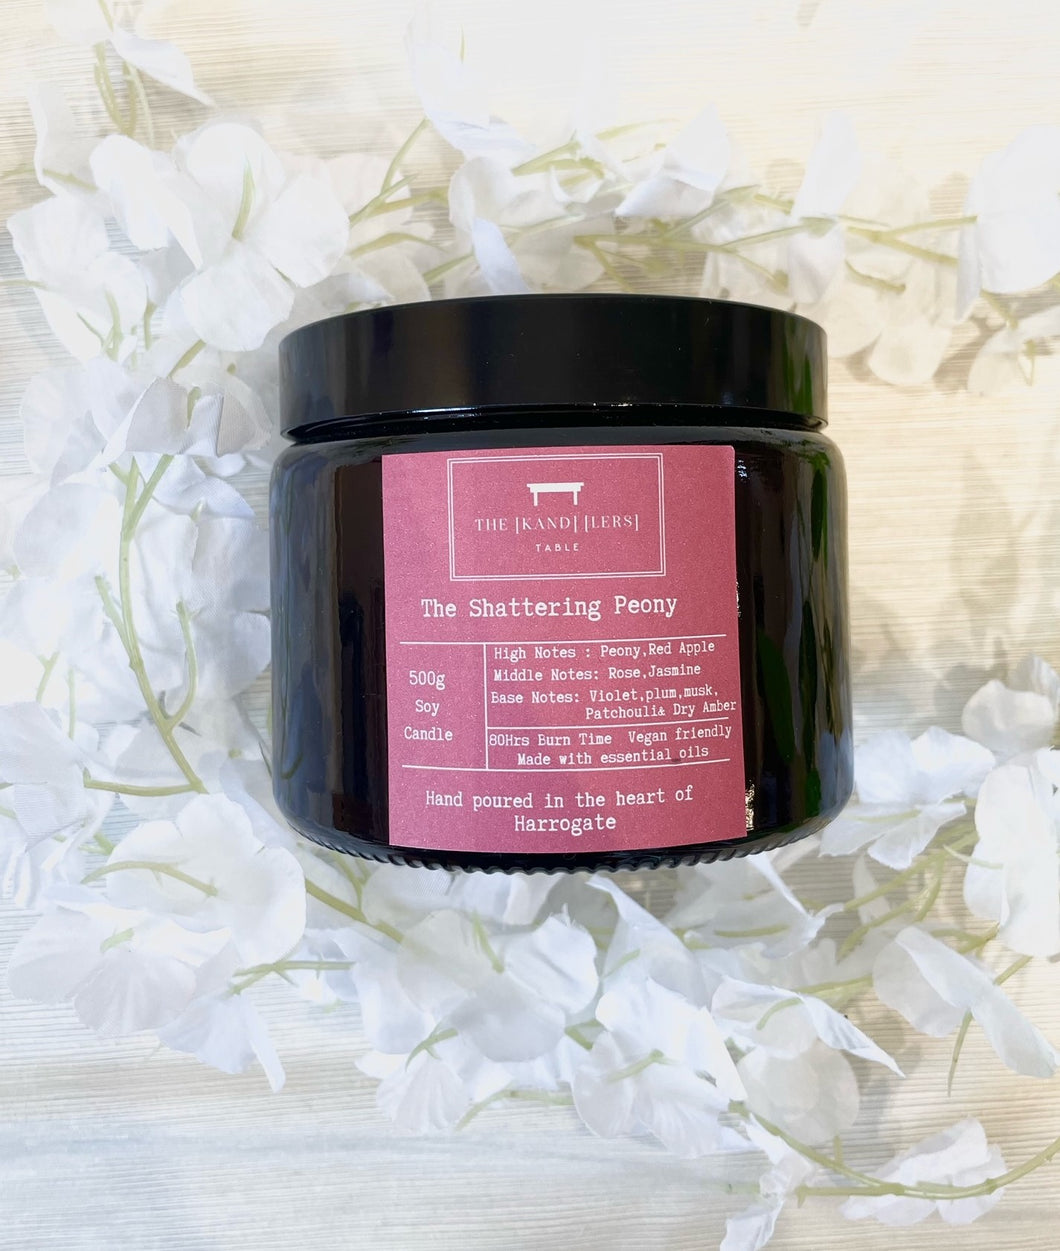 The Kandlers Table - Shattering Peony 500g Candle